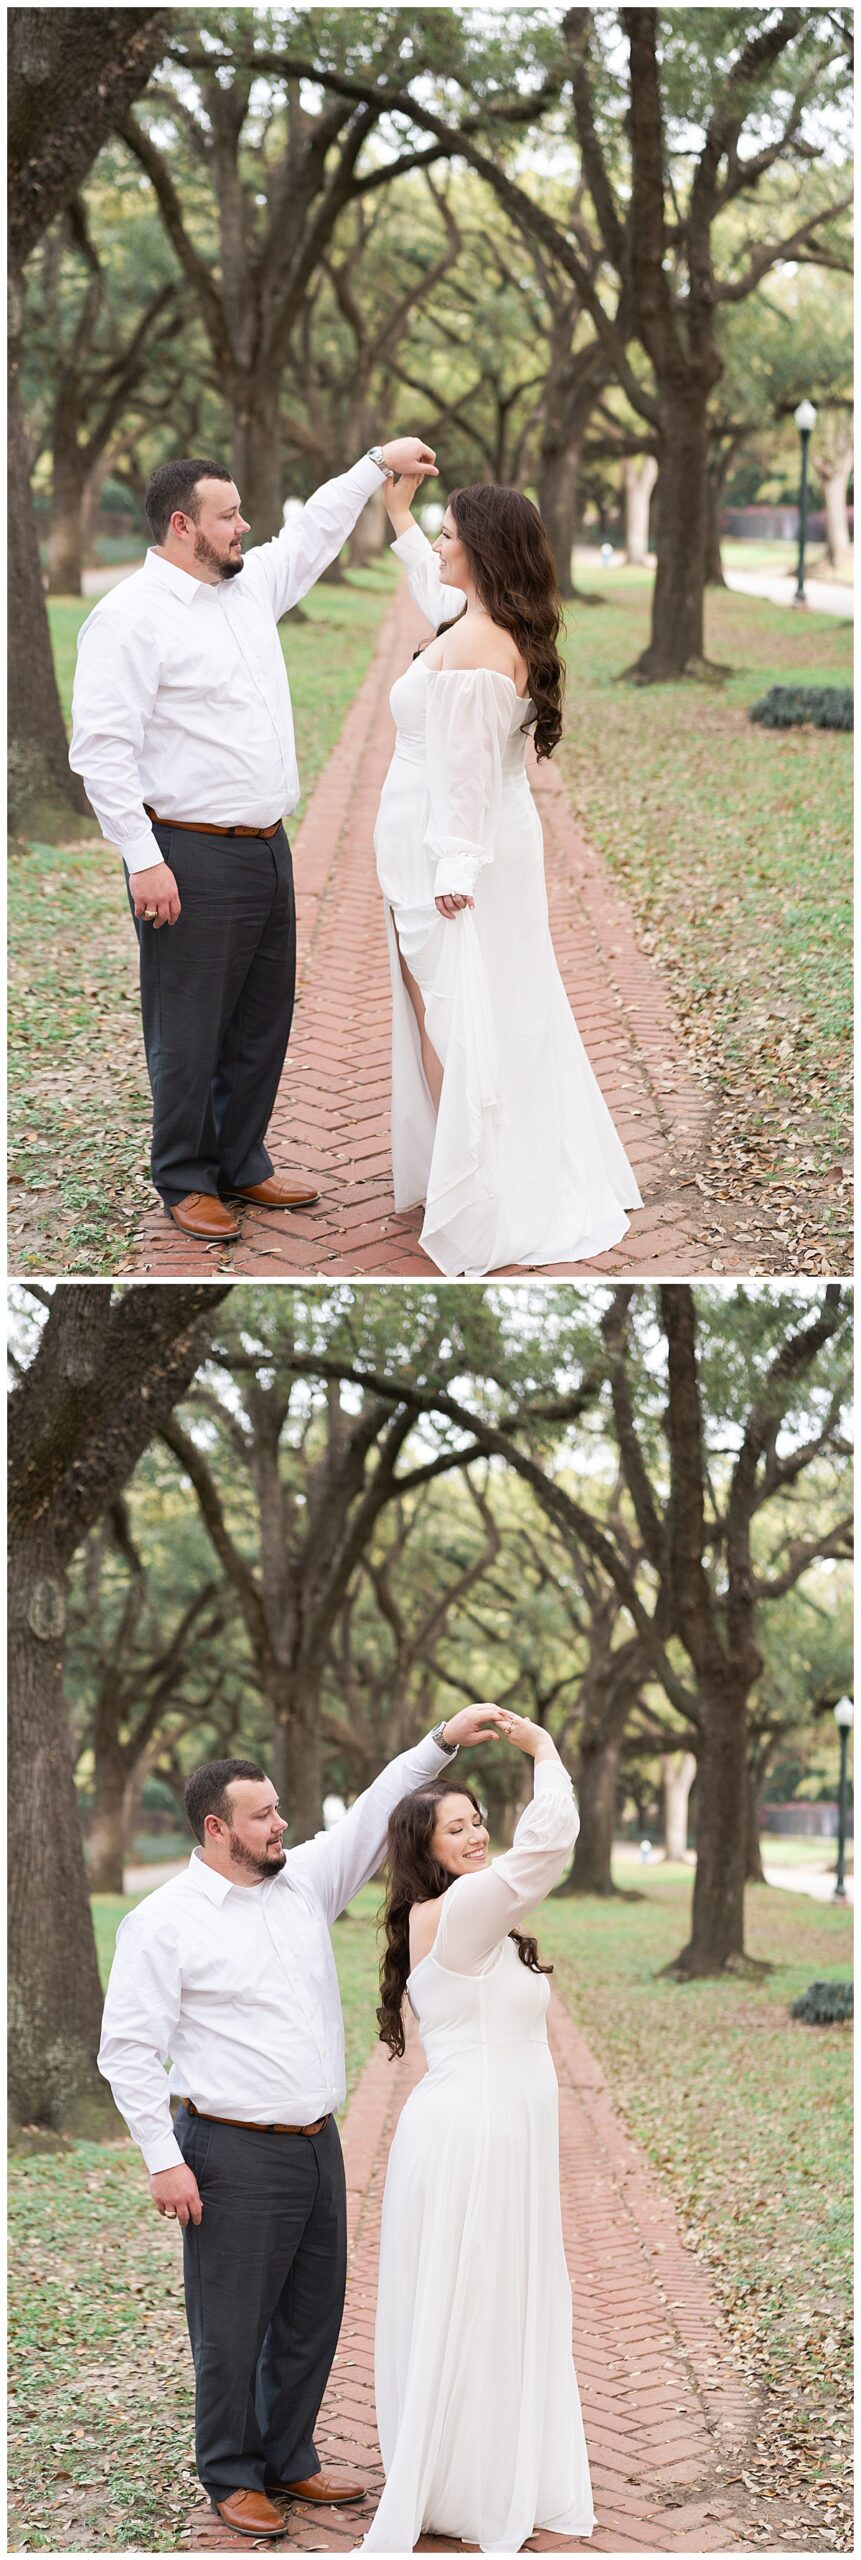 Couple dance together during their Boulevard Oaks Engagement Session